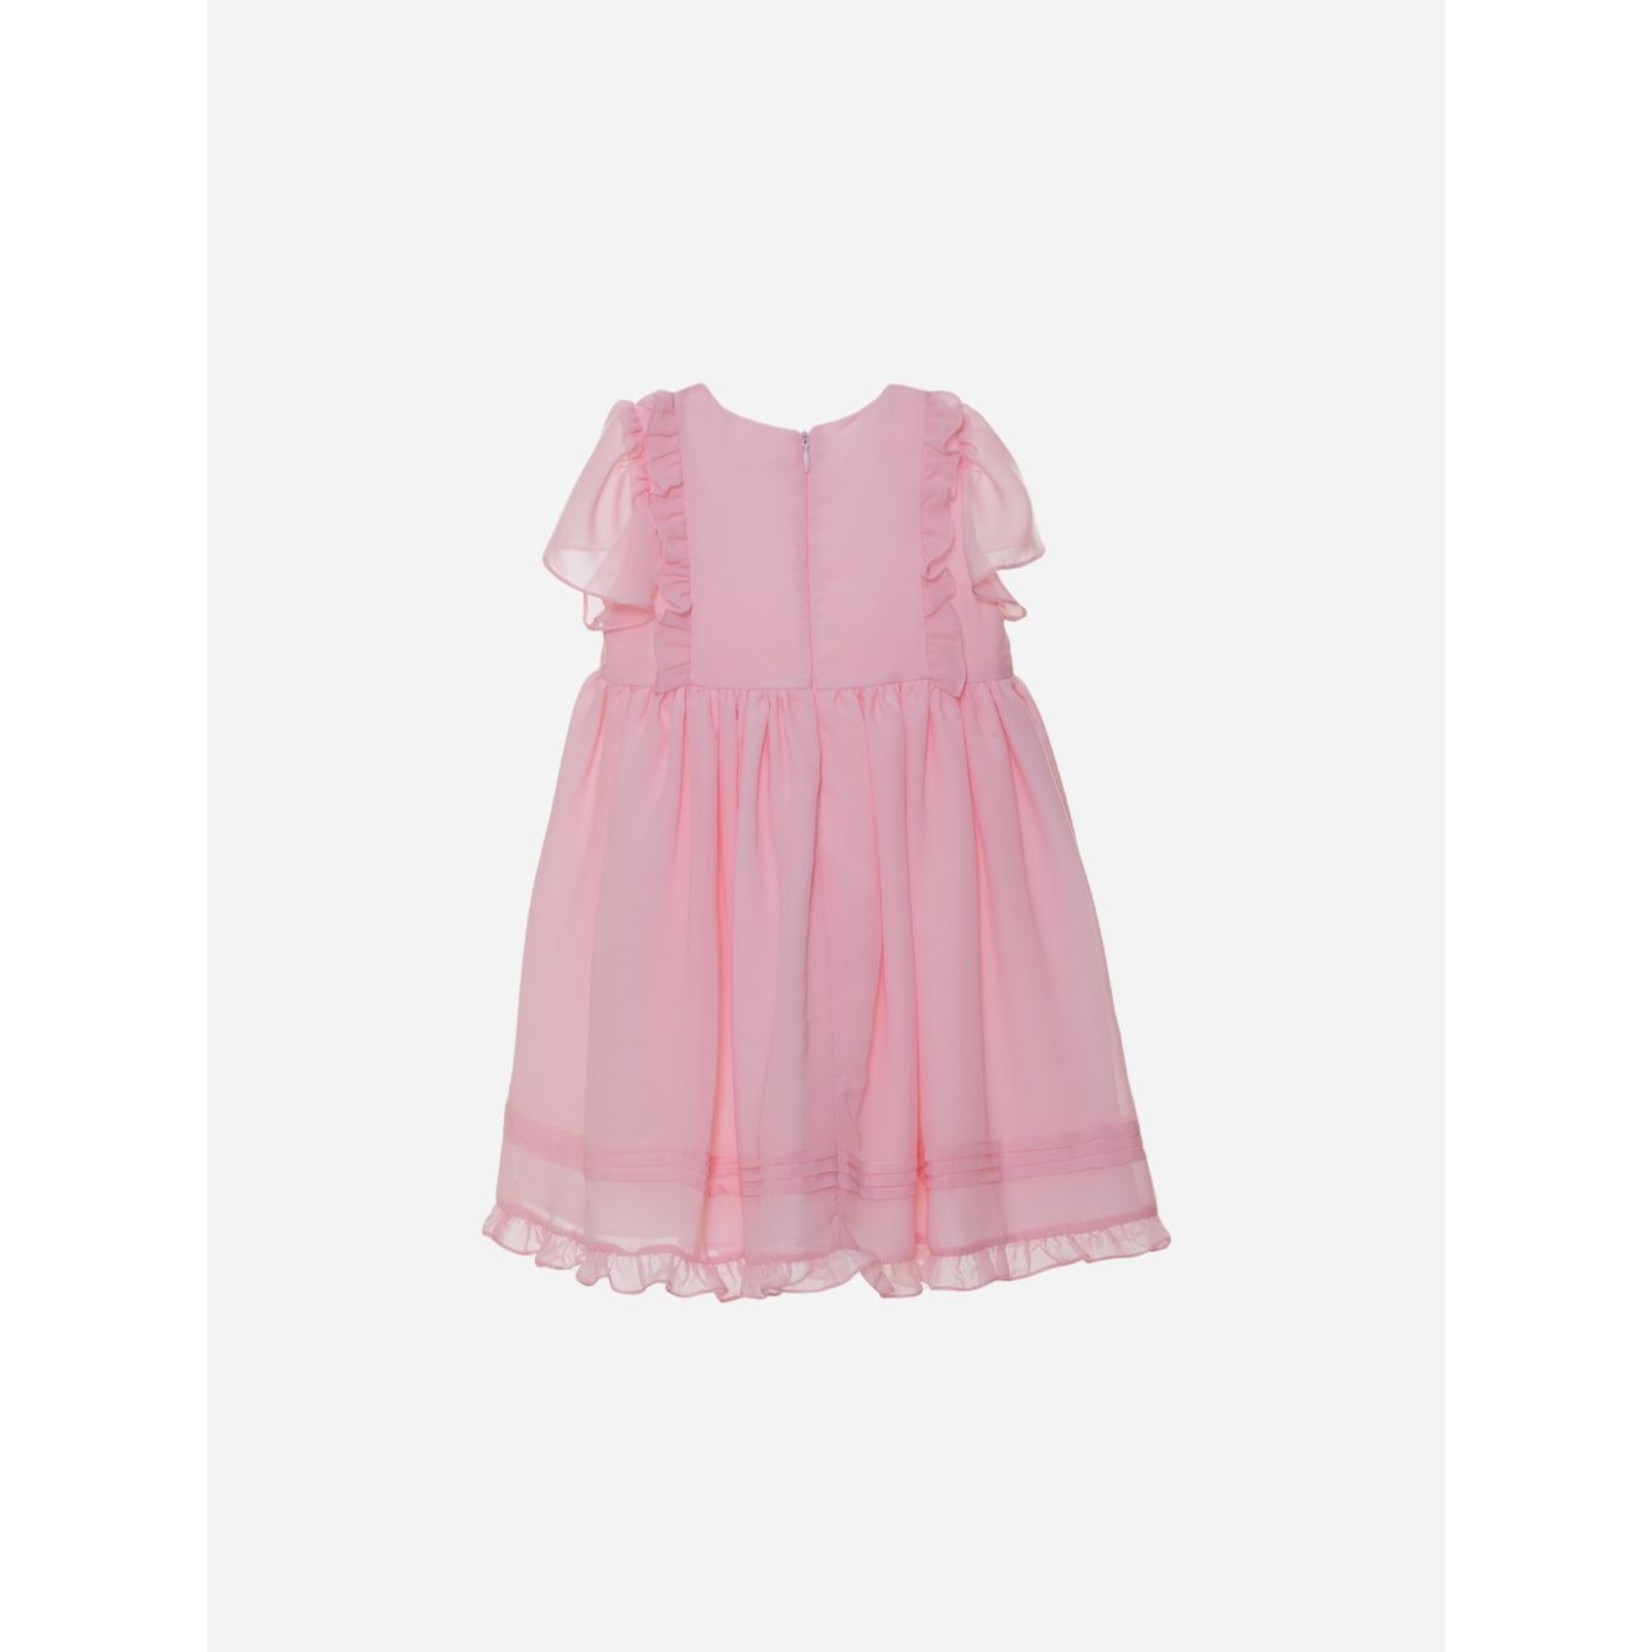 SPECIAL OCCASION PINK CHIFFON DRESS